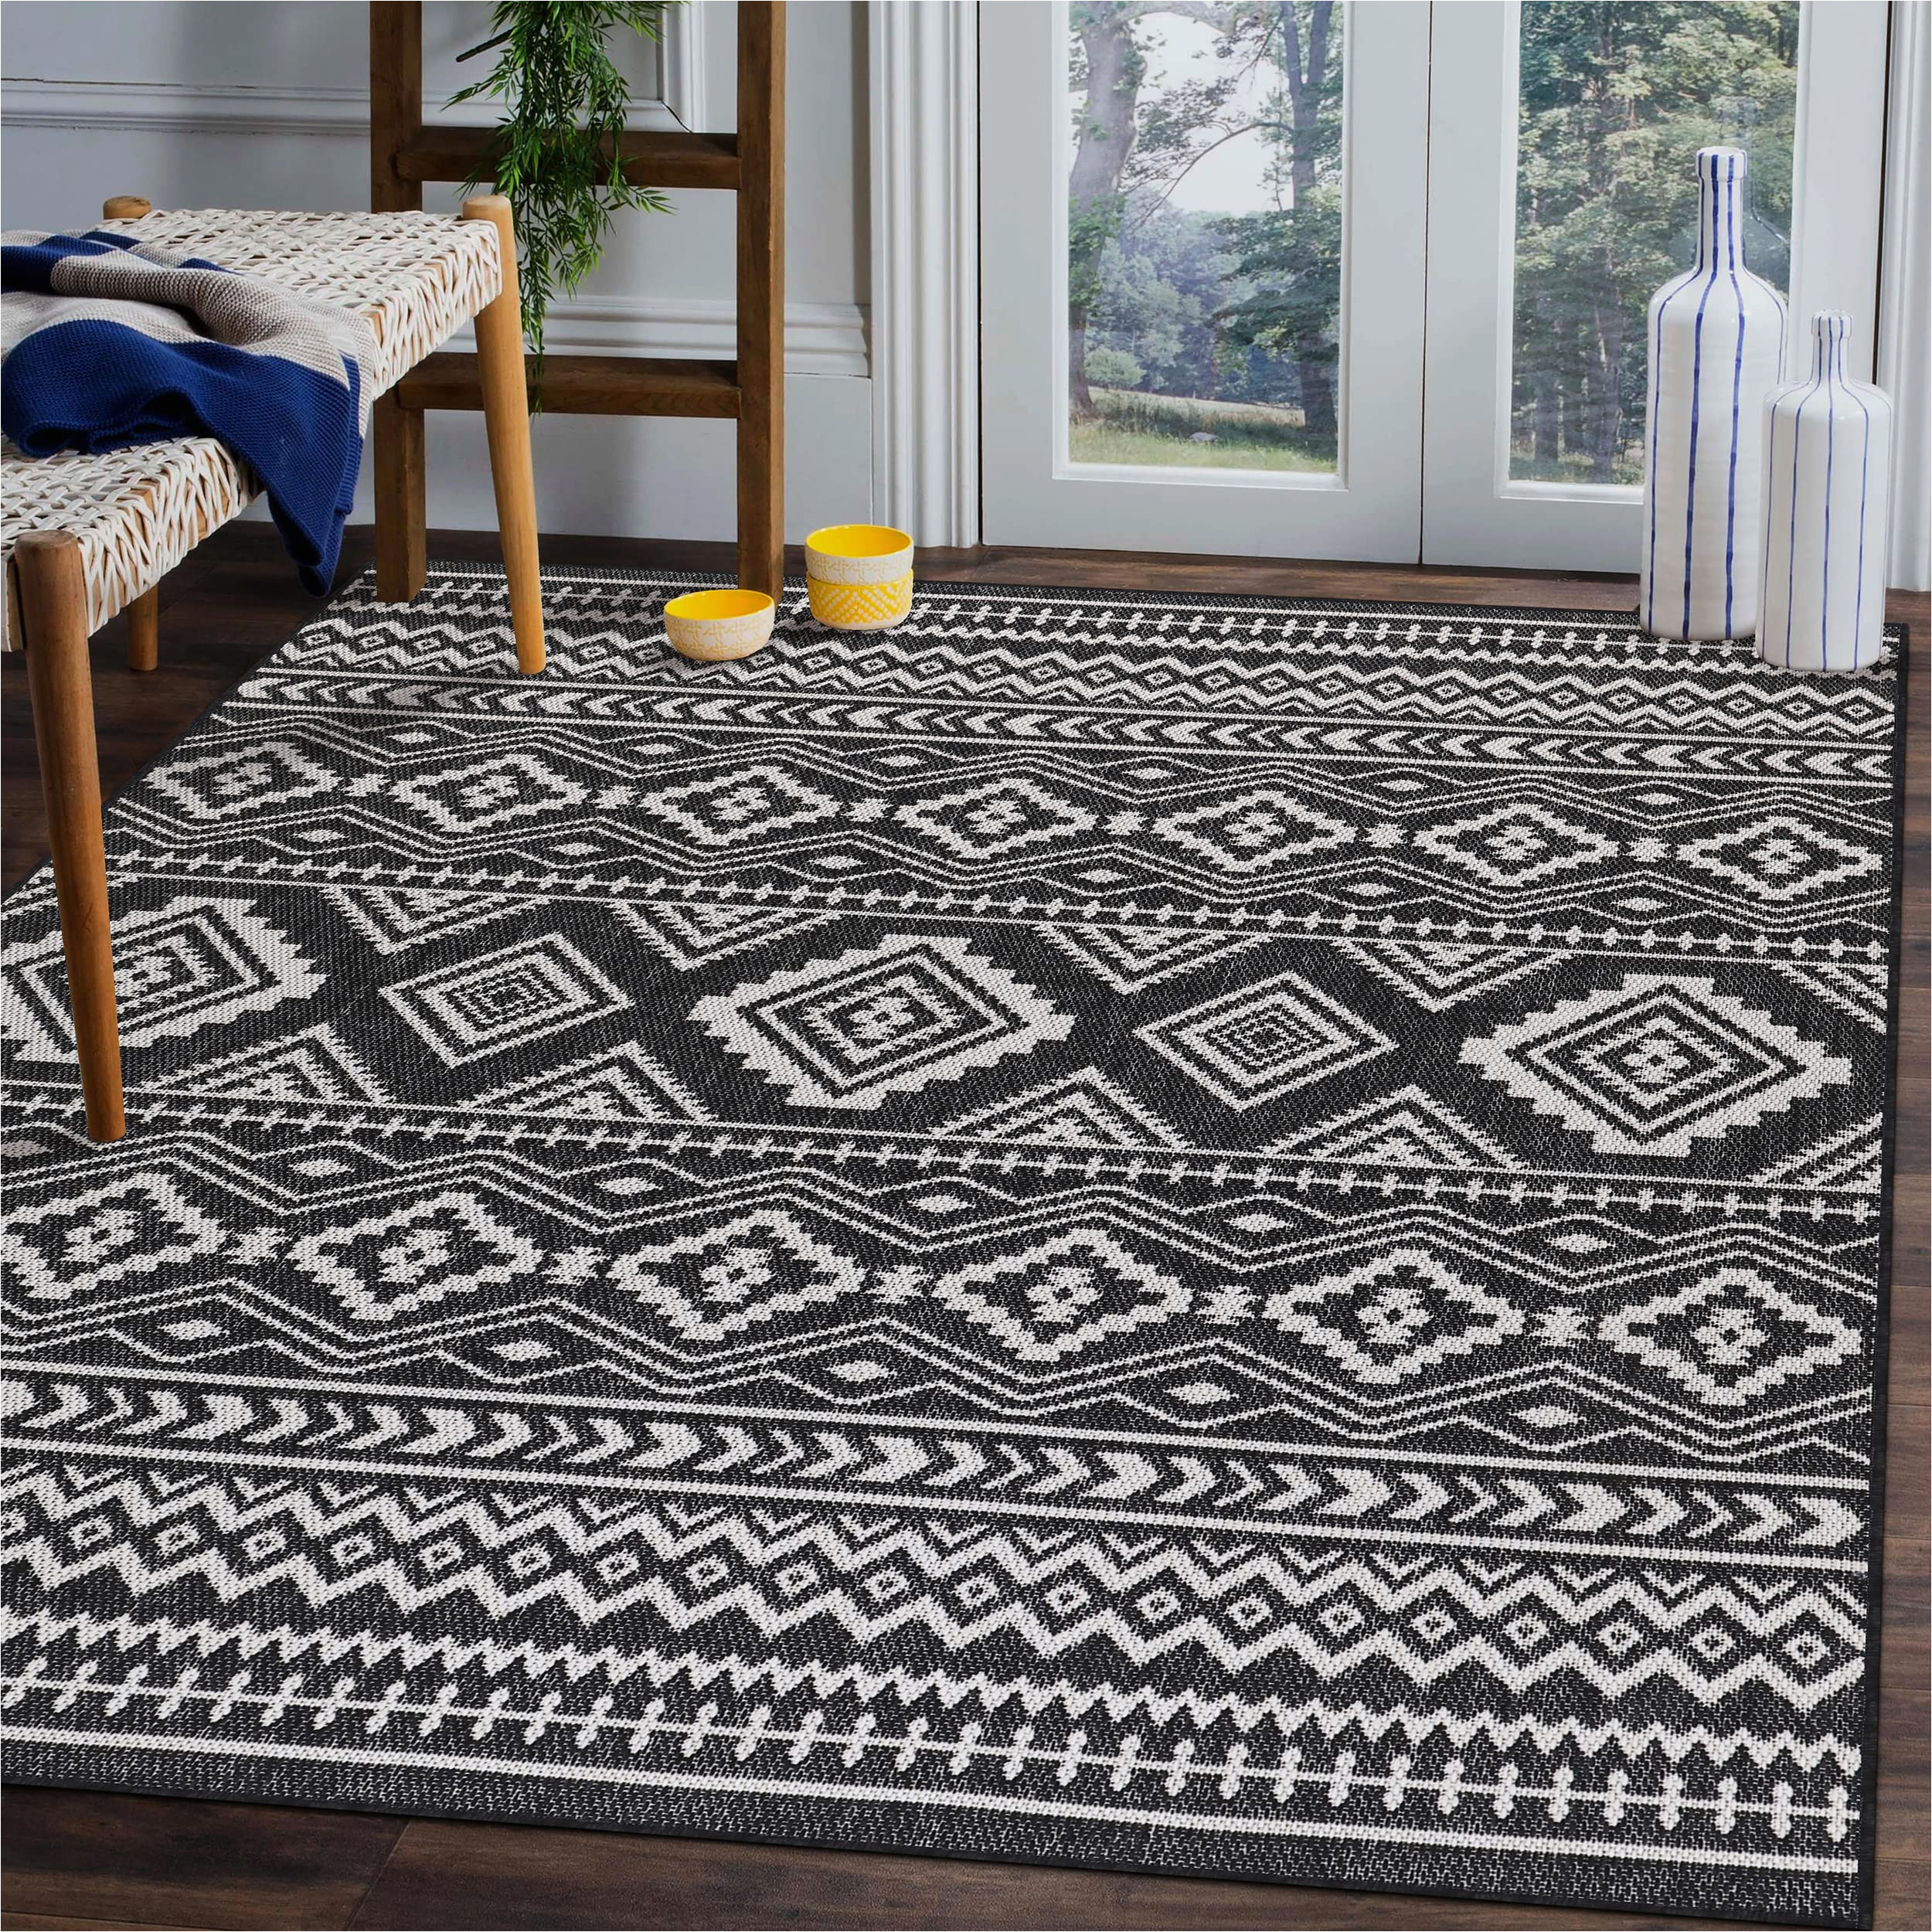 5×7 Black and White area Rugs Beverly Rug Waikiki Boho Indoor Outdoor Rug 5×7, Washable Outside Carpet for Patio, Deck, Porch, Bohemian area Rug, Farmhouse Rugs, Aztec Tribal Rug, …